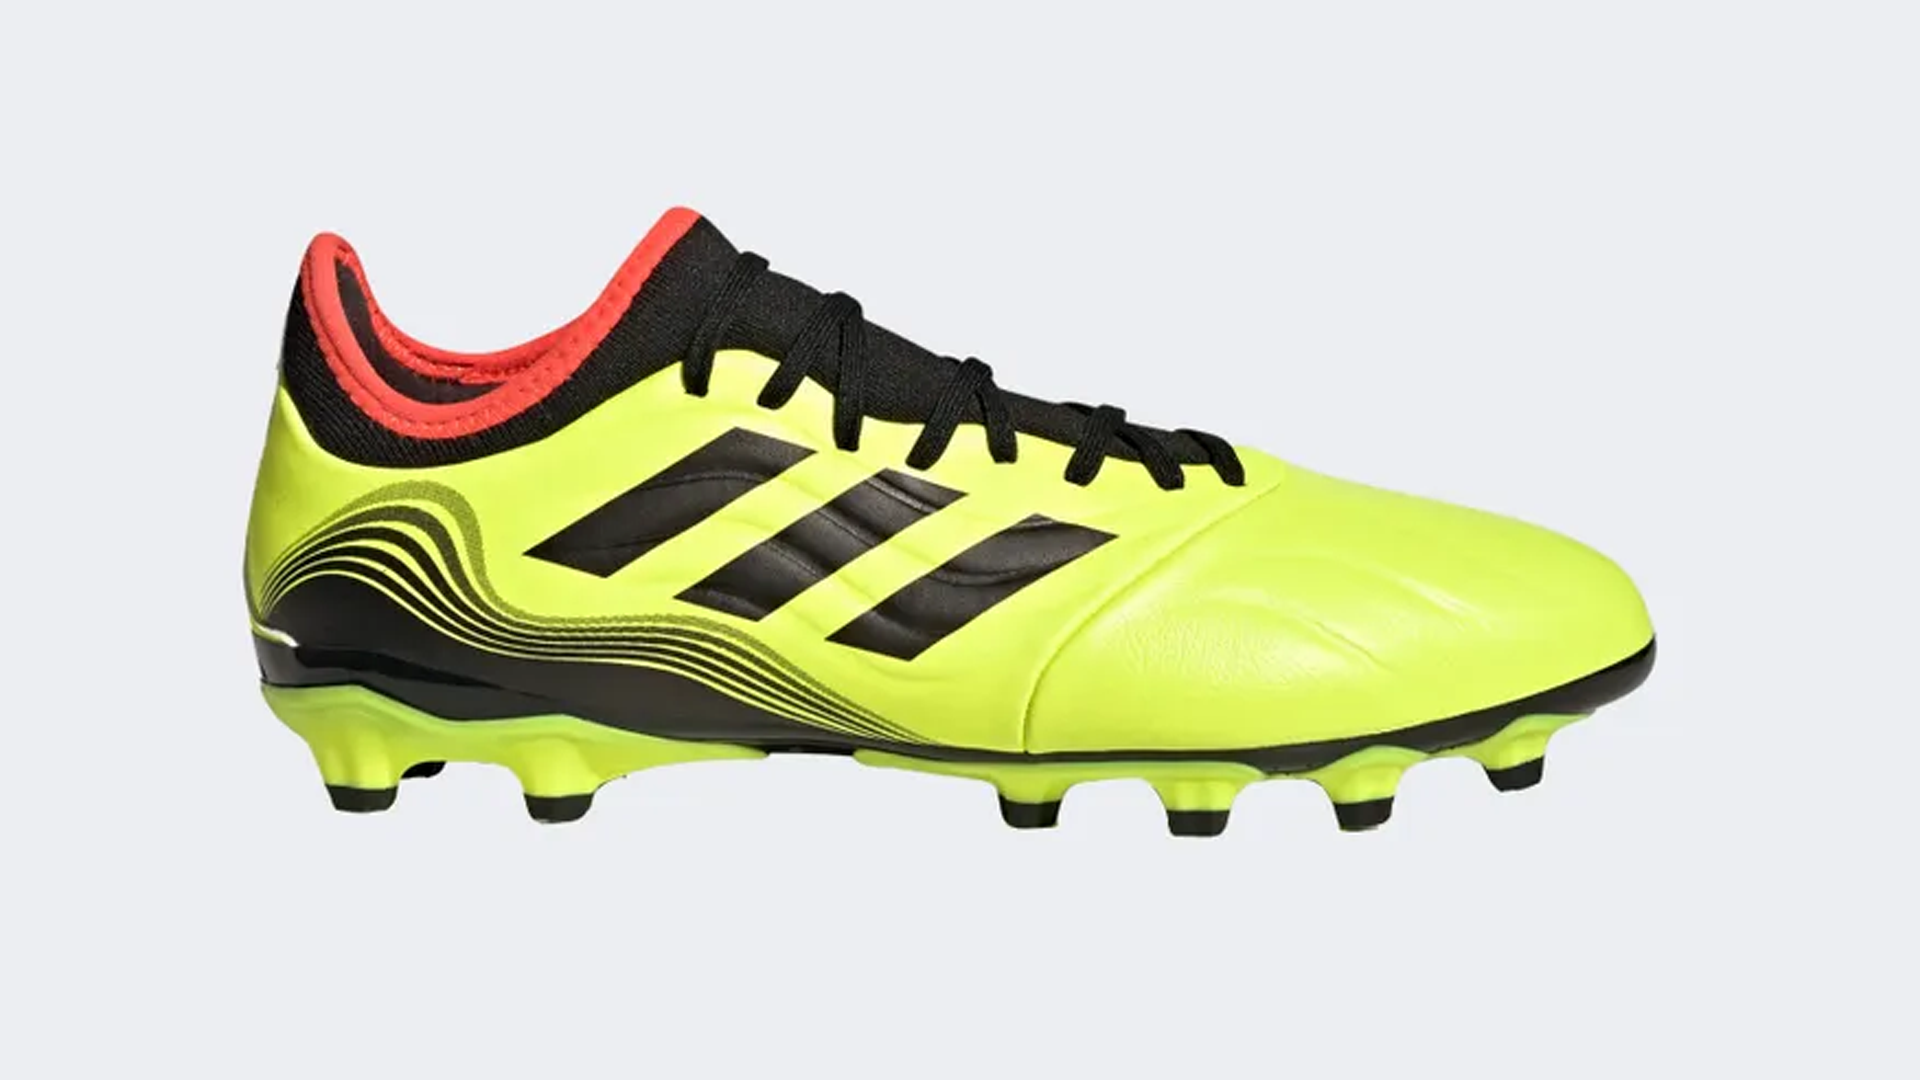 adidas football boots can in 2023 | Goal.com UK